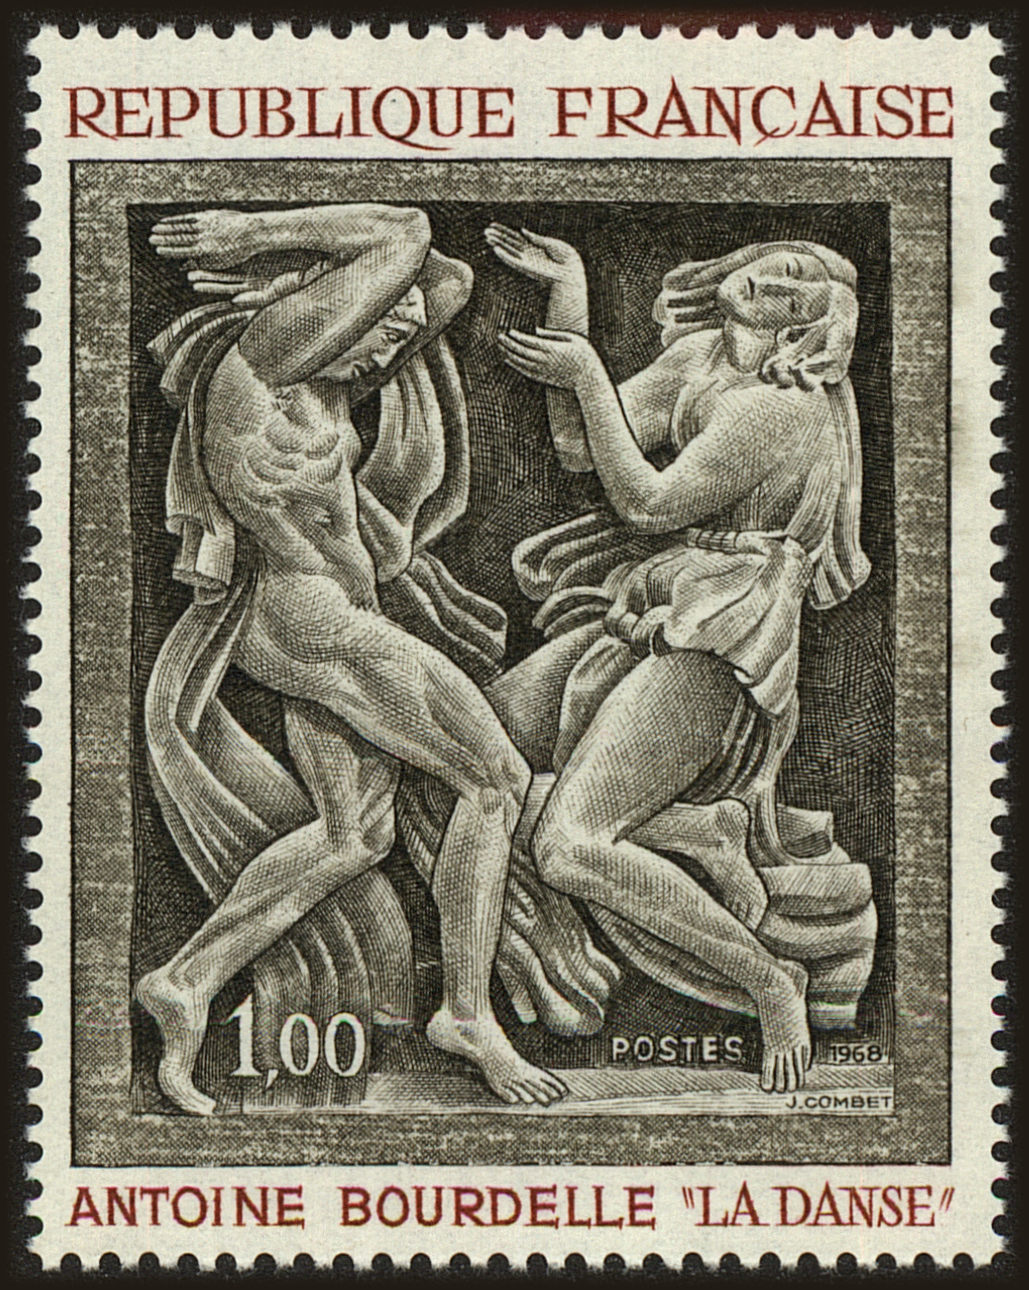 Front view of France 1206 collectors stamp